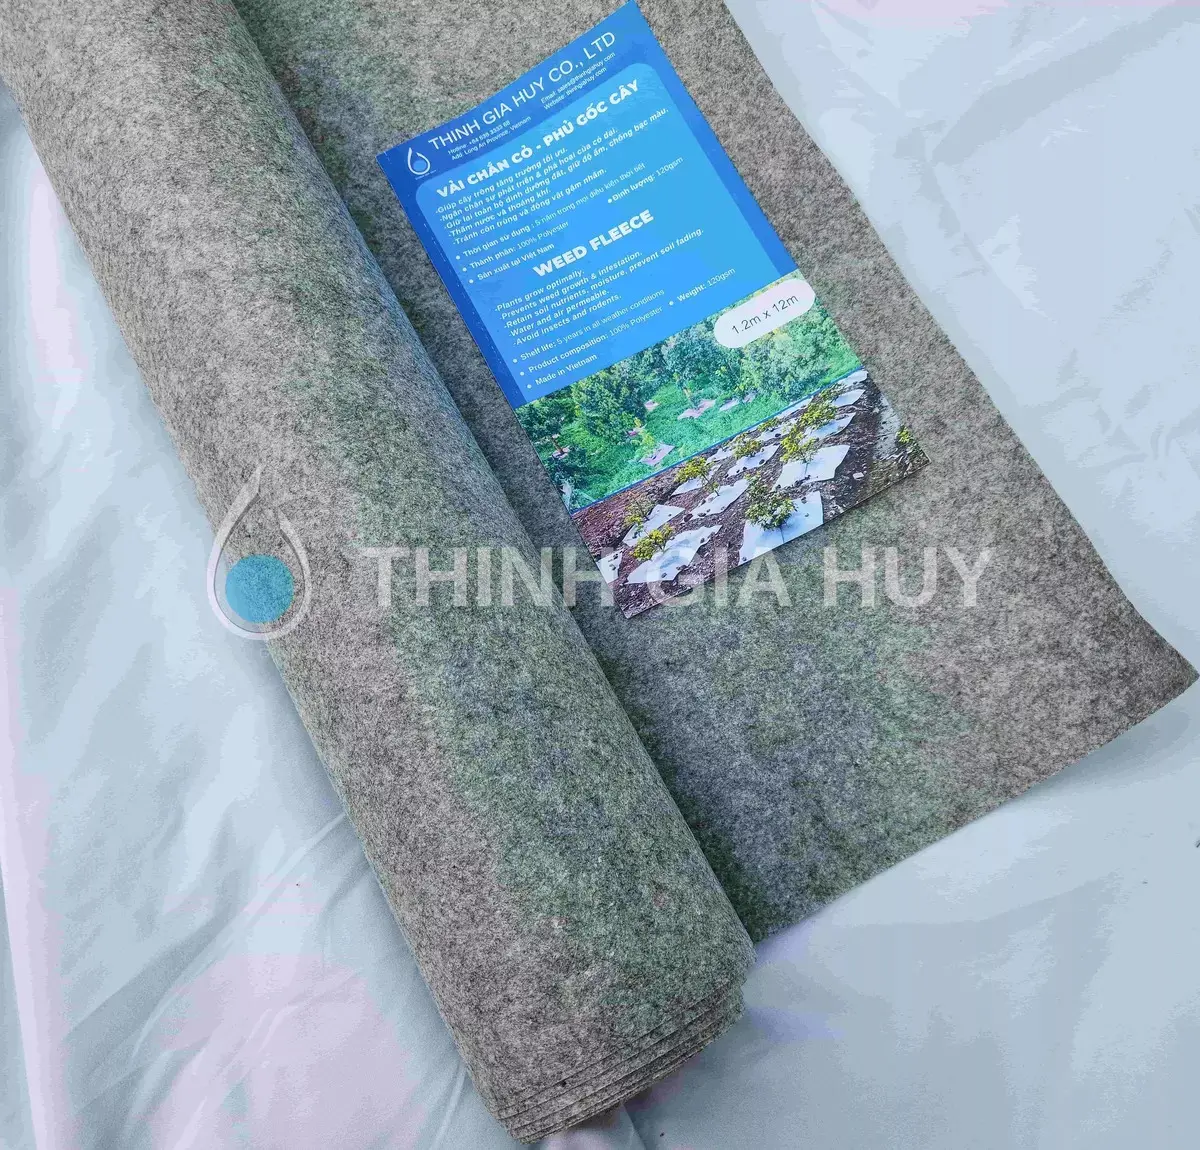 Weed control fabric - Felt fabric production - needle Punched - materials made in Vietnam high quality - Agriculture